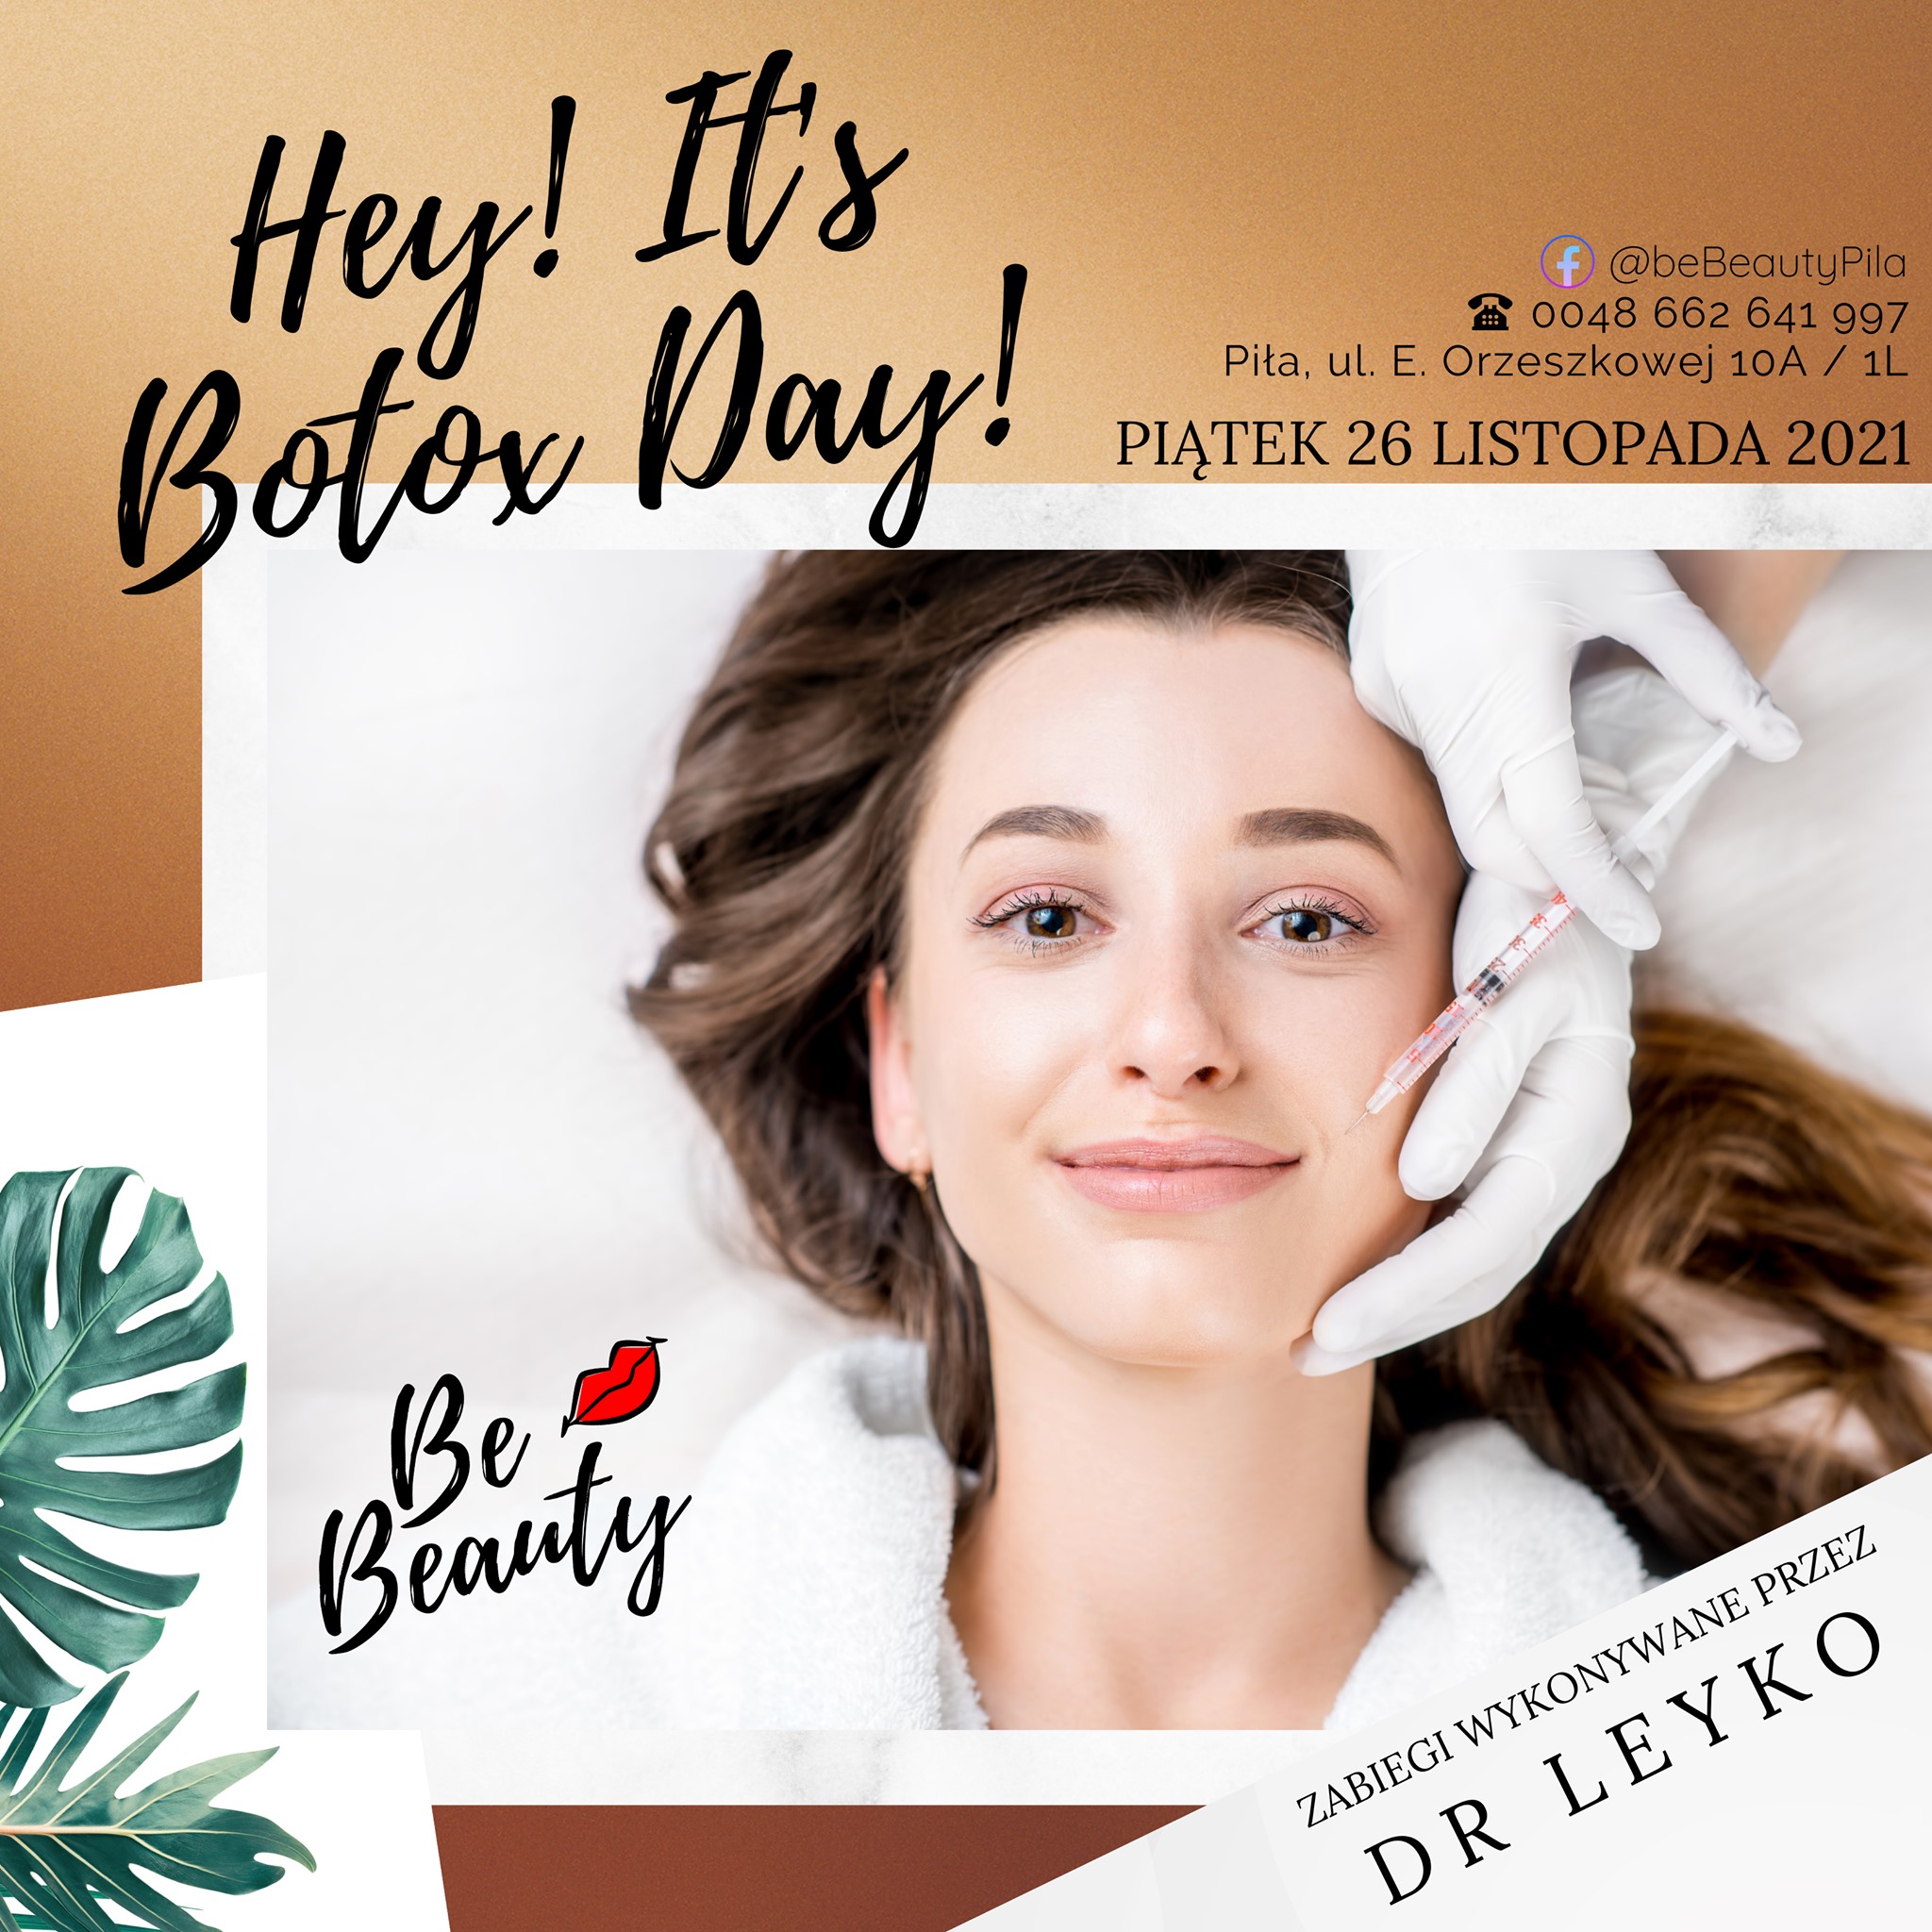 You are currently viewing Botox Day w Be Beauty!